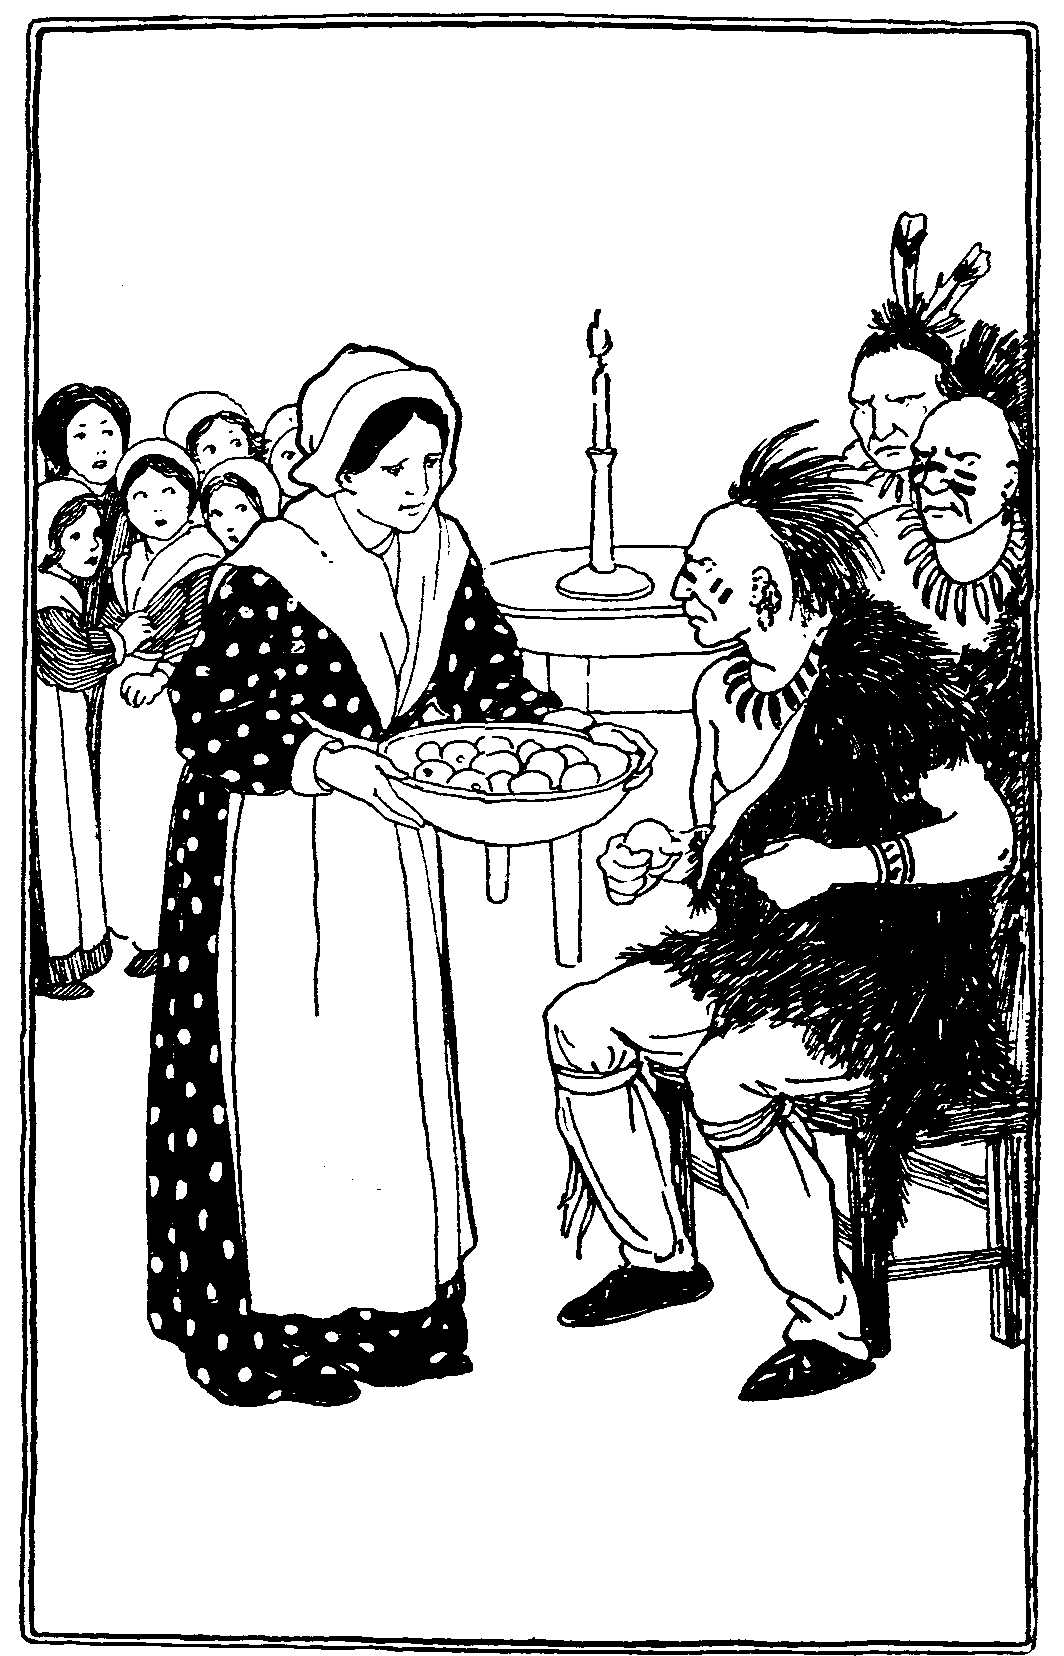 [Illustration] from Stories of the Pilgrims by M. B. Pumphrey